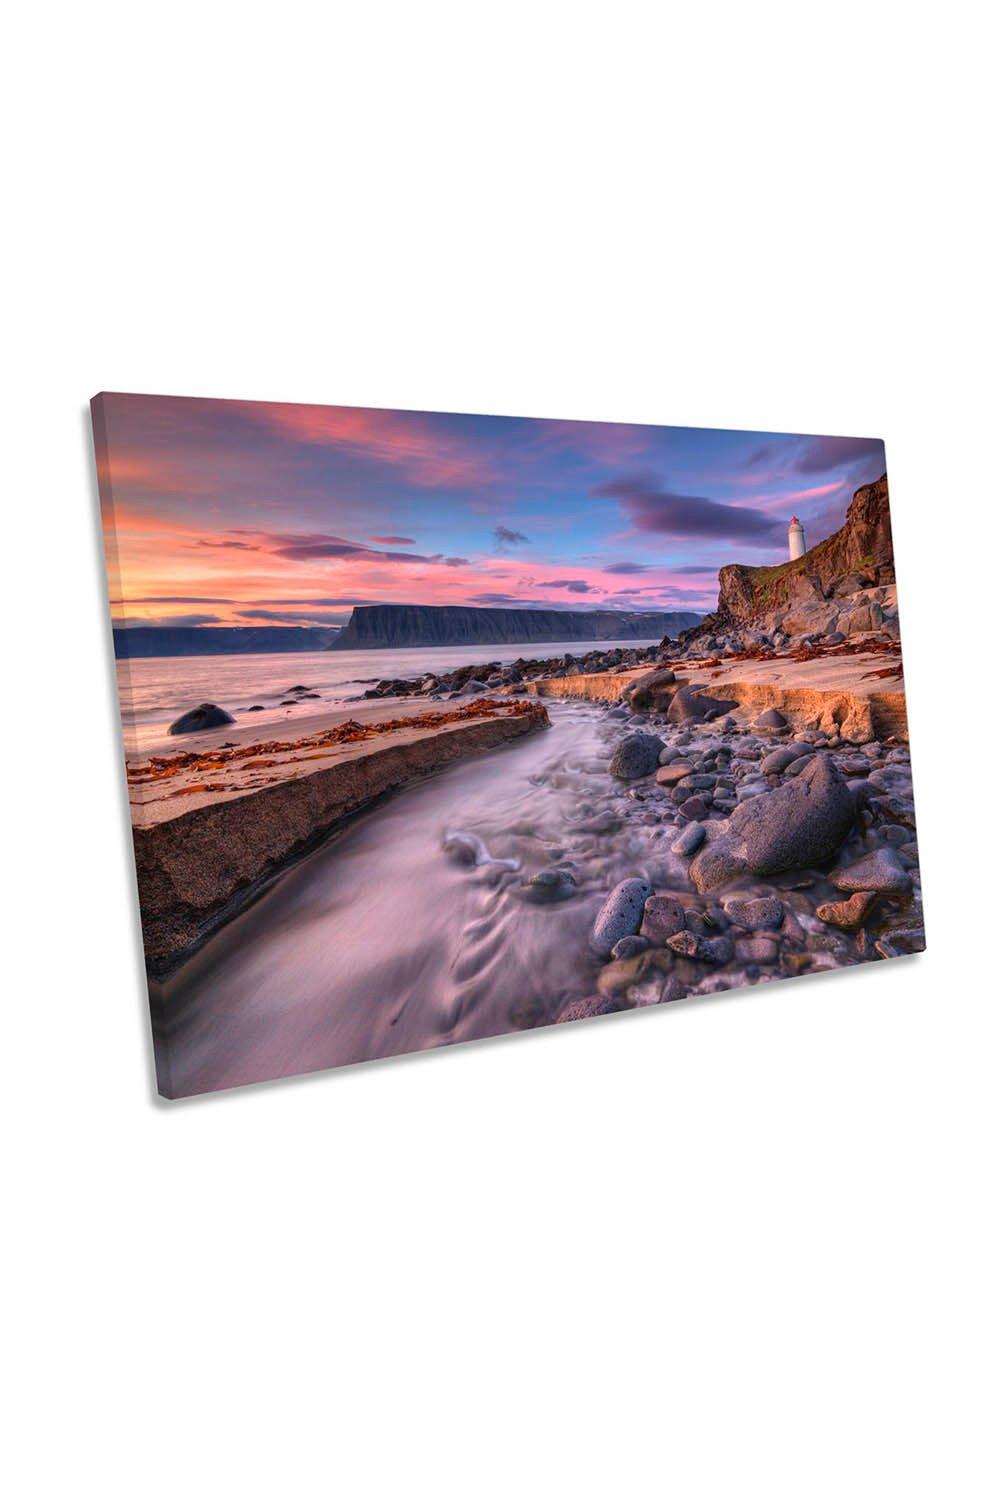 Pebble Beach Lighthouse Sunset Canvas Wall Art Picture Print